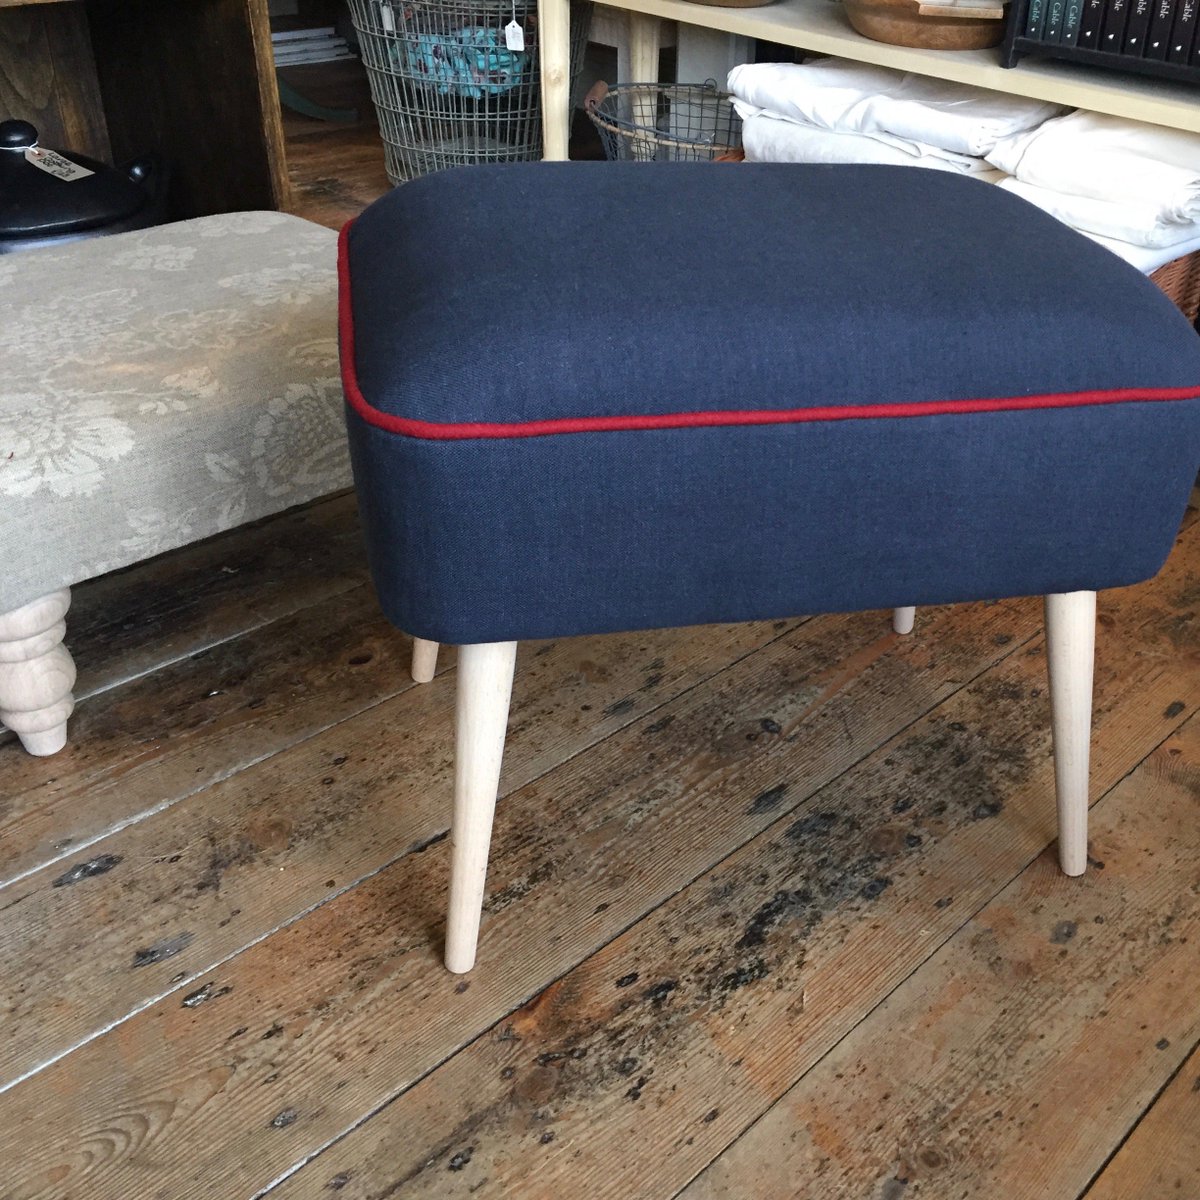 Embracing #januaryblues keeping busy in the workshop giving this @MinistryofUphol #midcenturystool the #Scandi twist #blueblackandred